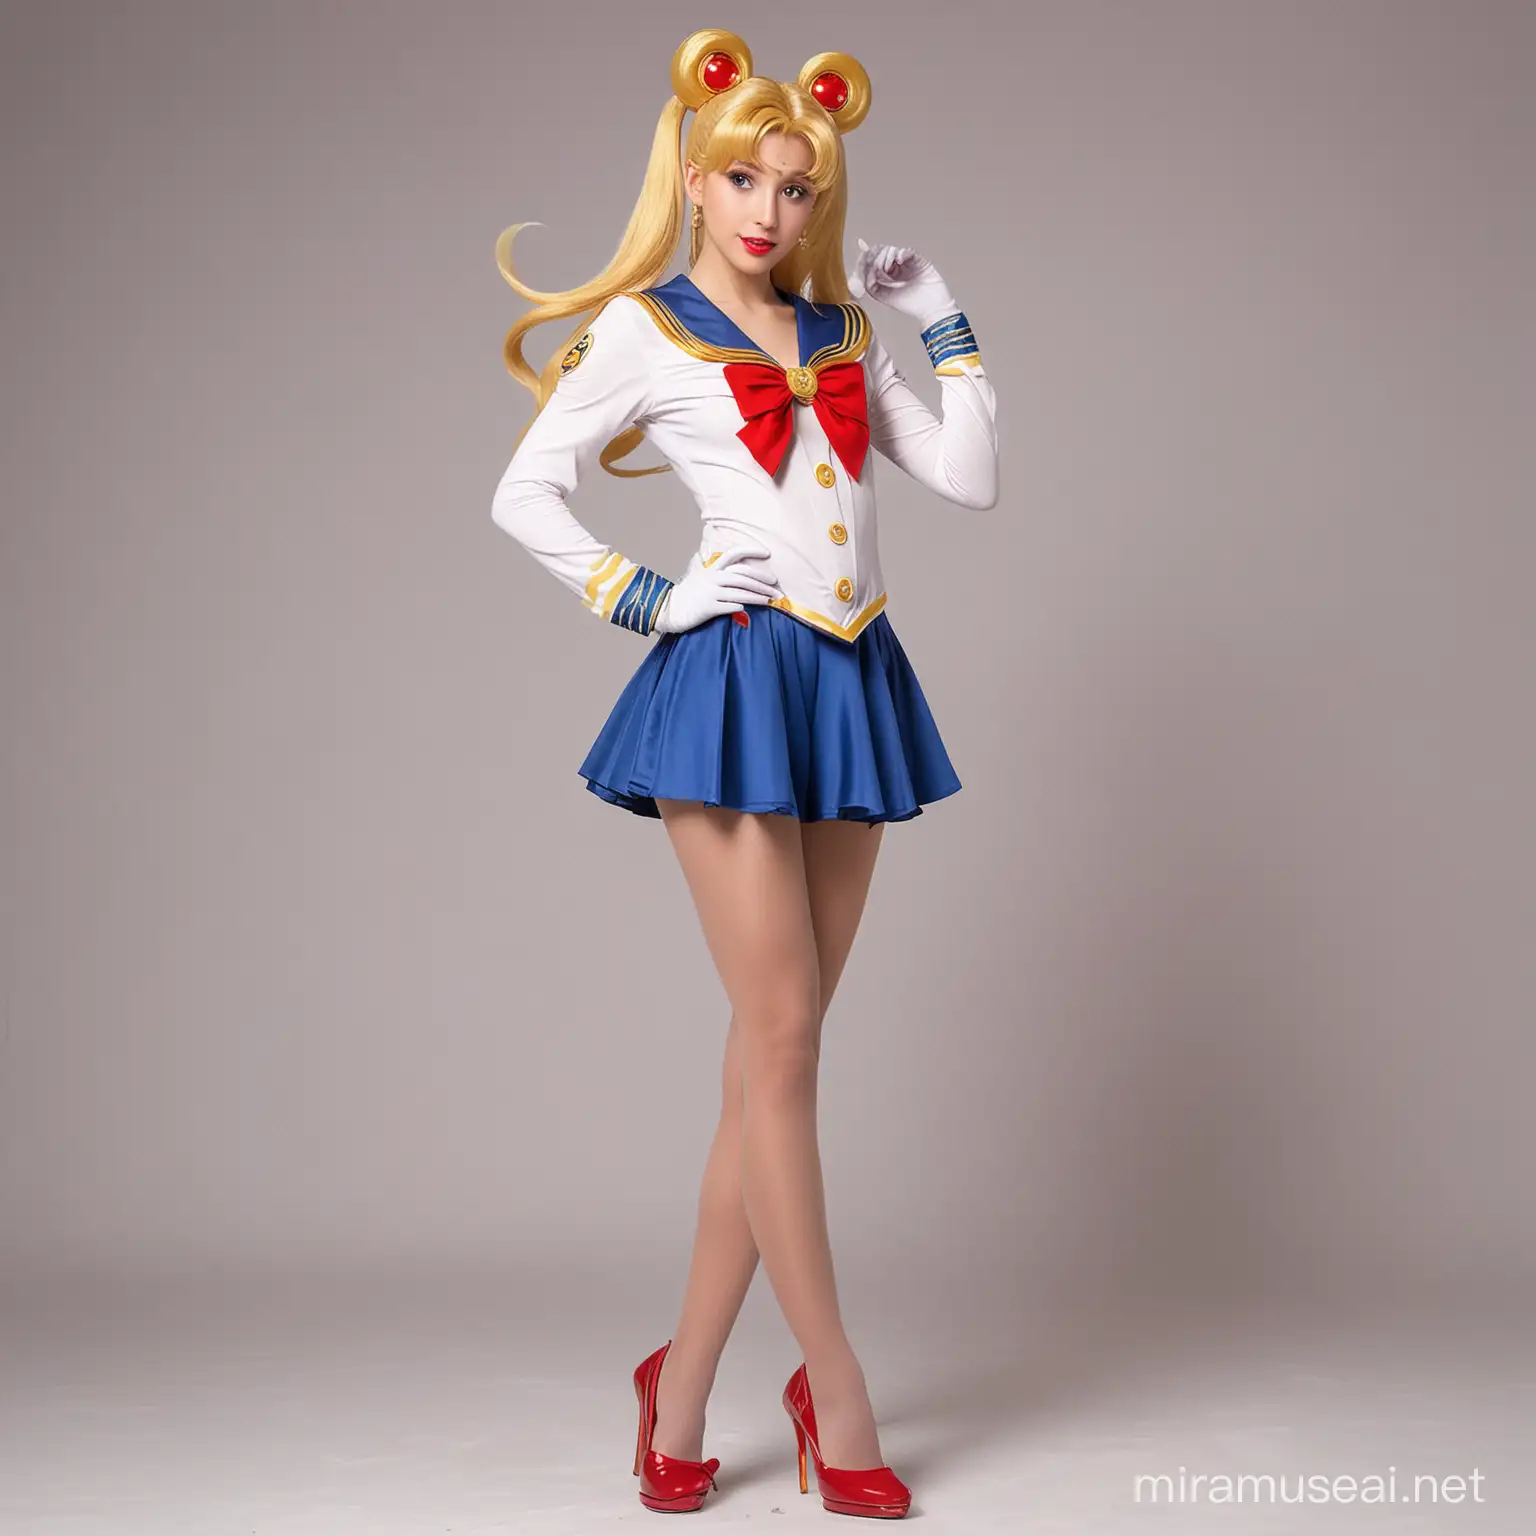 Stylish Sailor Moon Cosplay with Pantyhose and High Heels